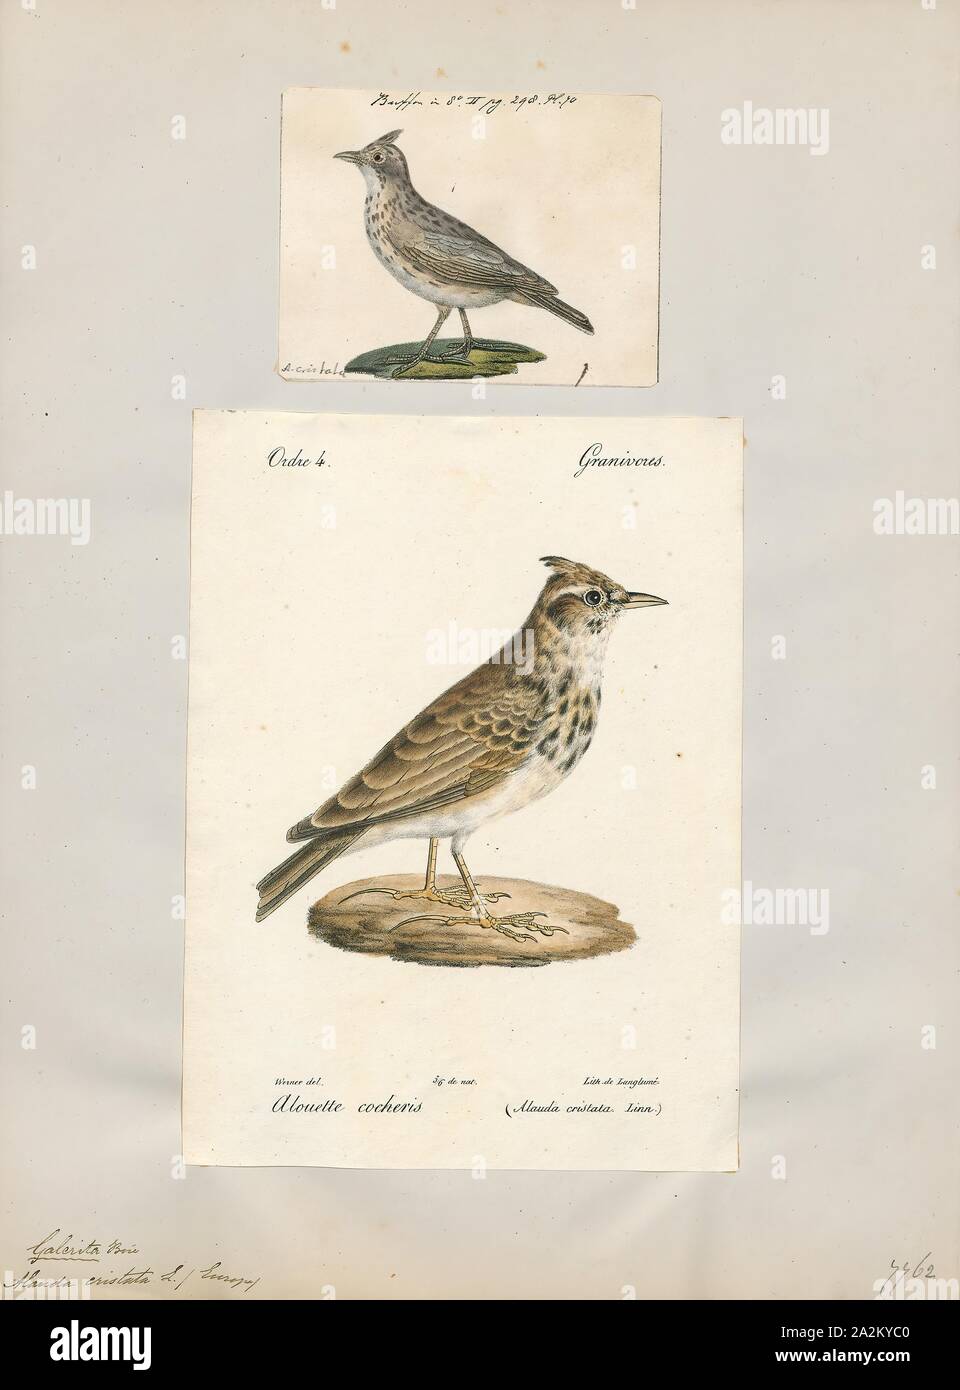 Alauda cristata, Print, The crested lark (Galerida cristata) is a species of lark distinguished from the other 81 species of lark by the crest of feathers that rise up in territorial or courtship displays and when singing. Common to mainland Europe, the birds can also be found in northern Africa and in parts of western Asia and China. It is a non-migratory bird, but can occasionally be found as a vagrant in Great Britain., 1700-1880 Stock Photo